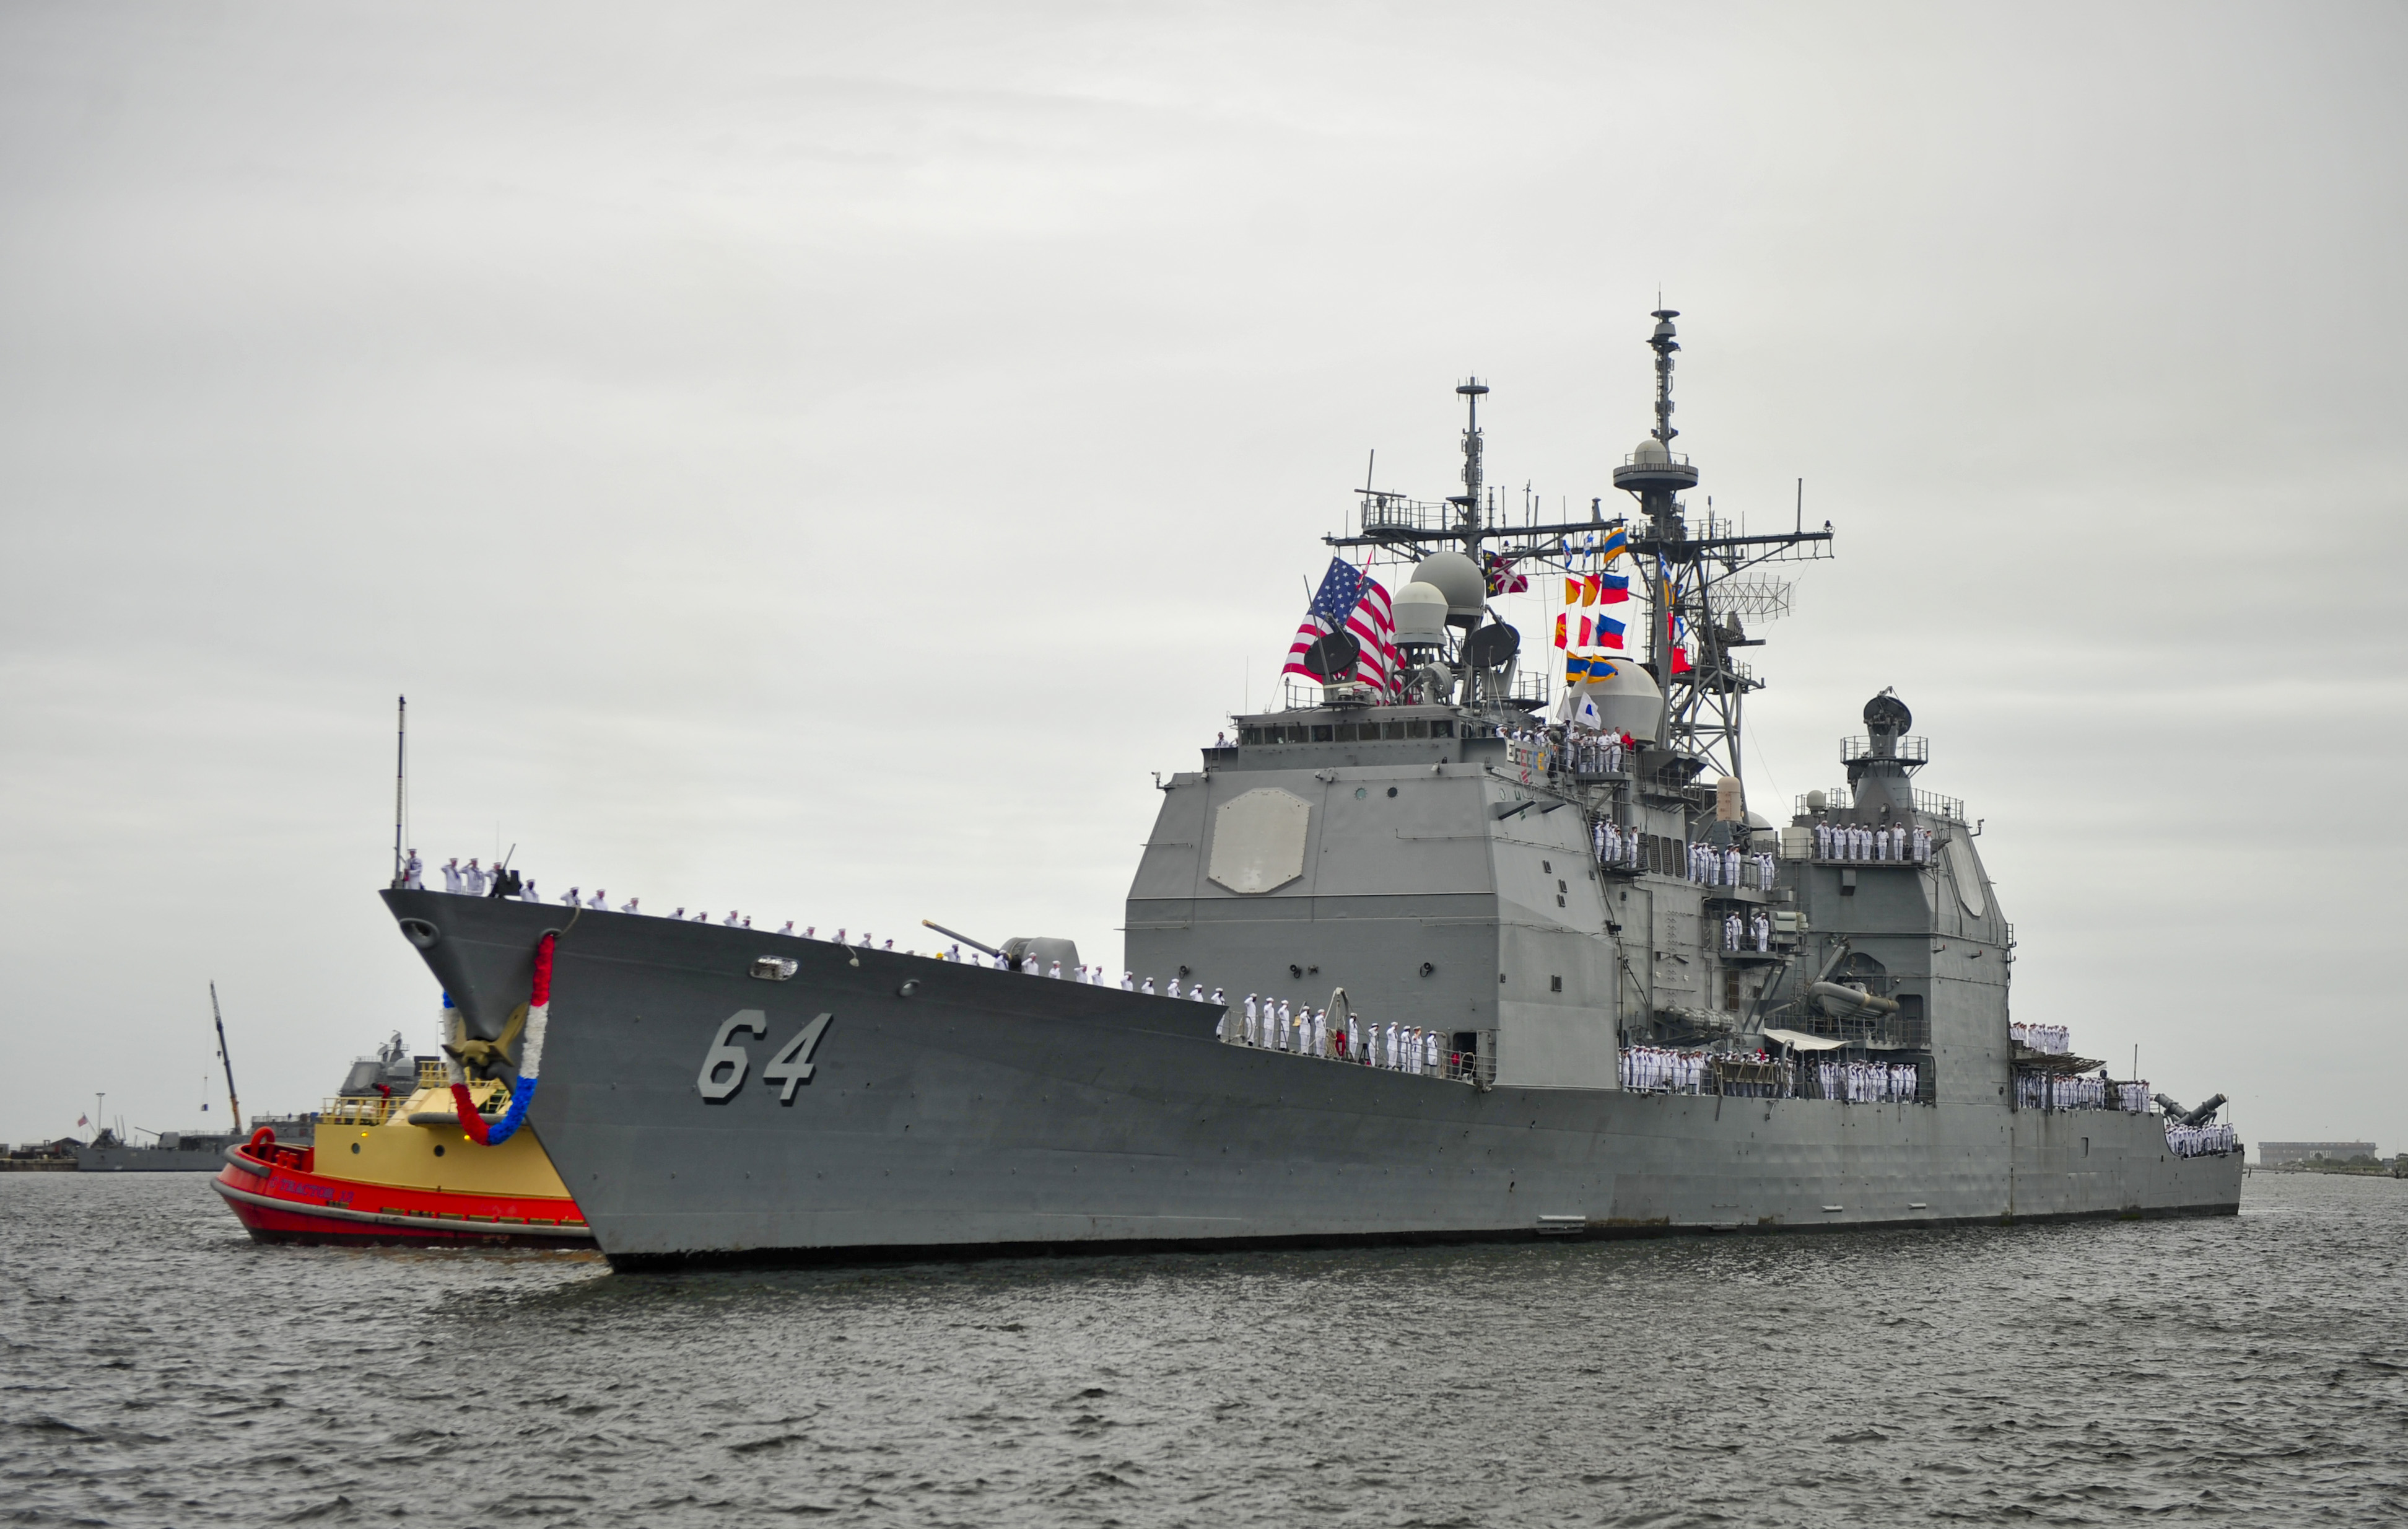 Guided-missile cruiser USS Gettysburg (CG 64), returns to Naval Station Mayport after a nine-month deployment to the U.S. 5th and 6th Fleet on April 18, 2014. US Navy Photo